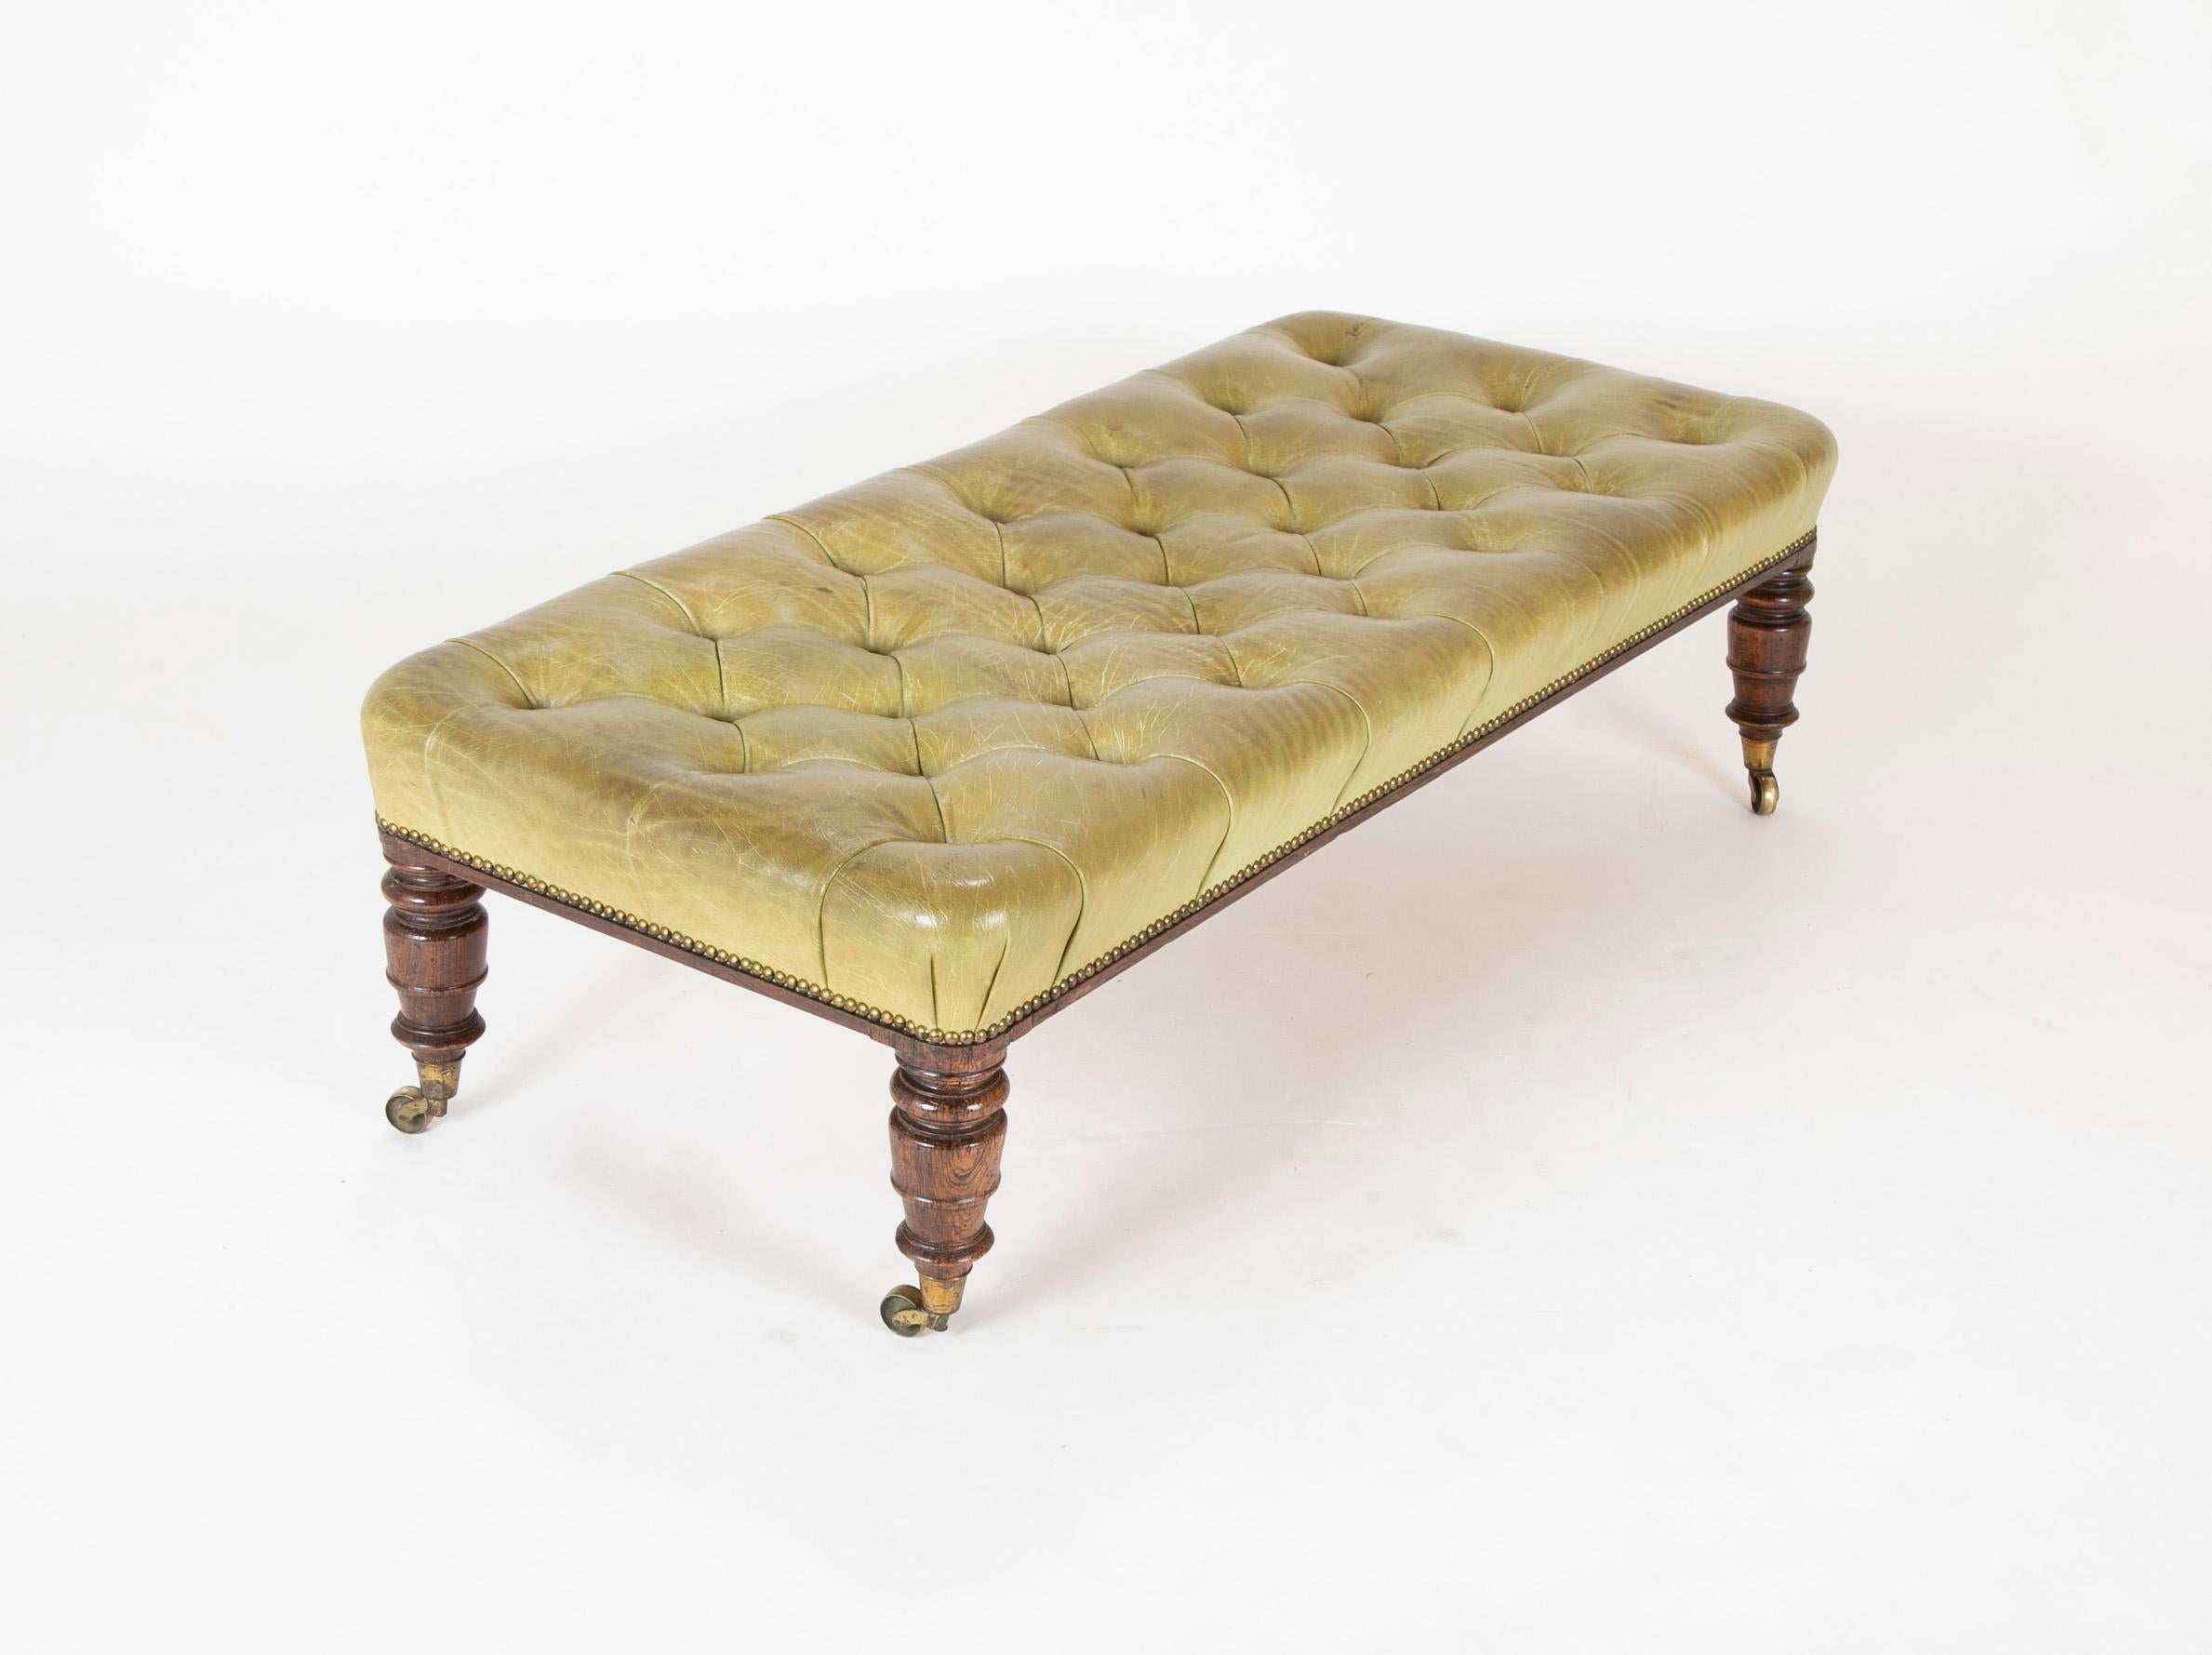 A 19th century English tufted green leather bench with brass nailed trim over tapering walnut turned legs ending on brass casters, circa 1880.